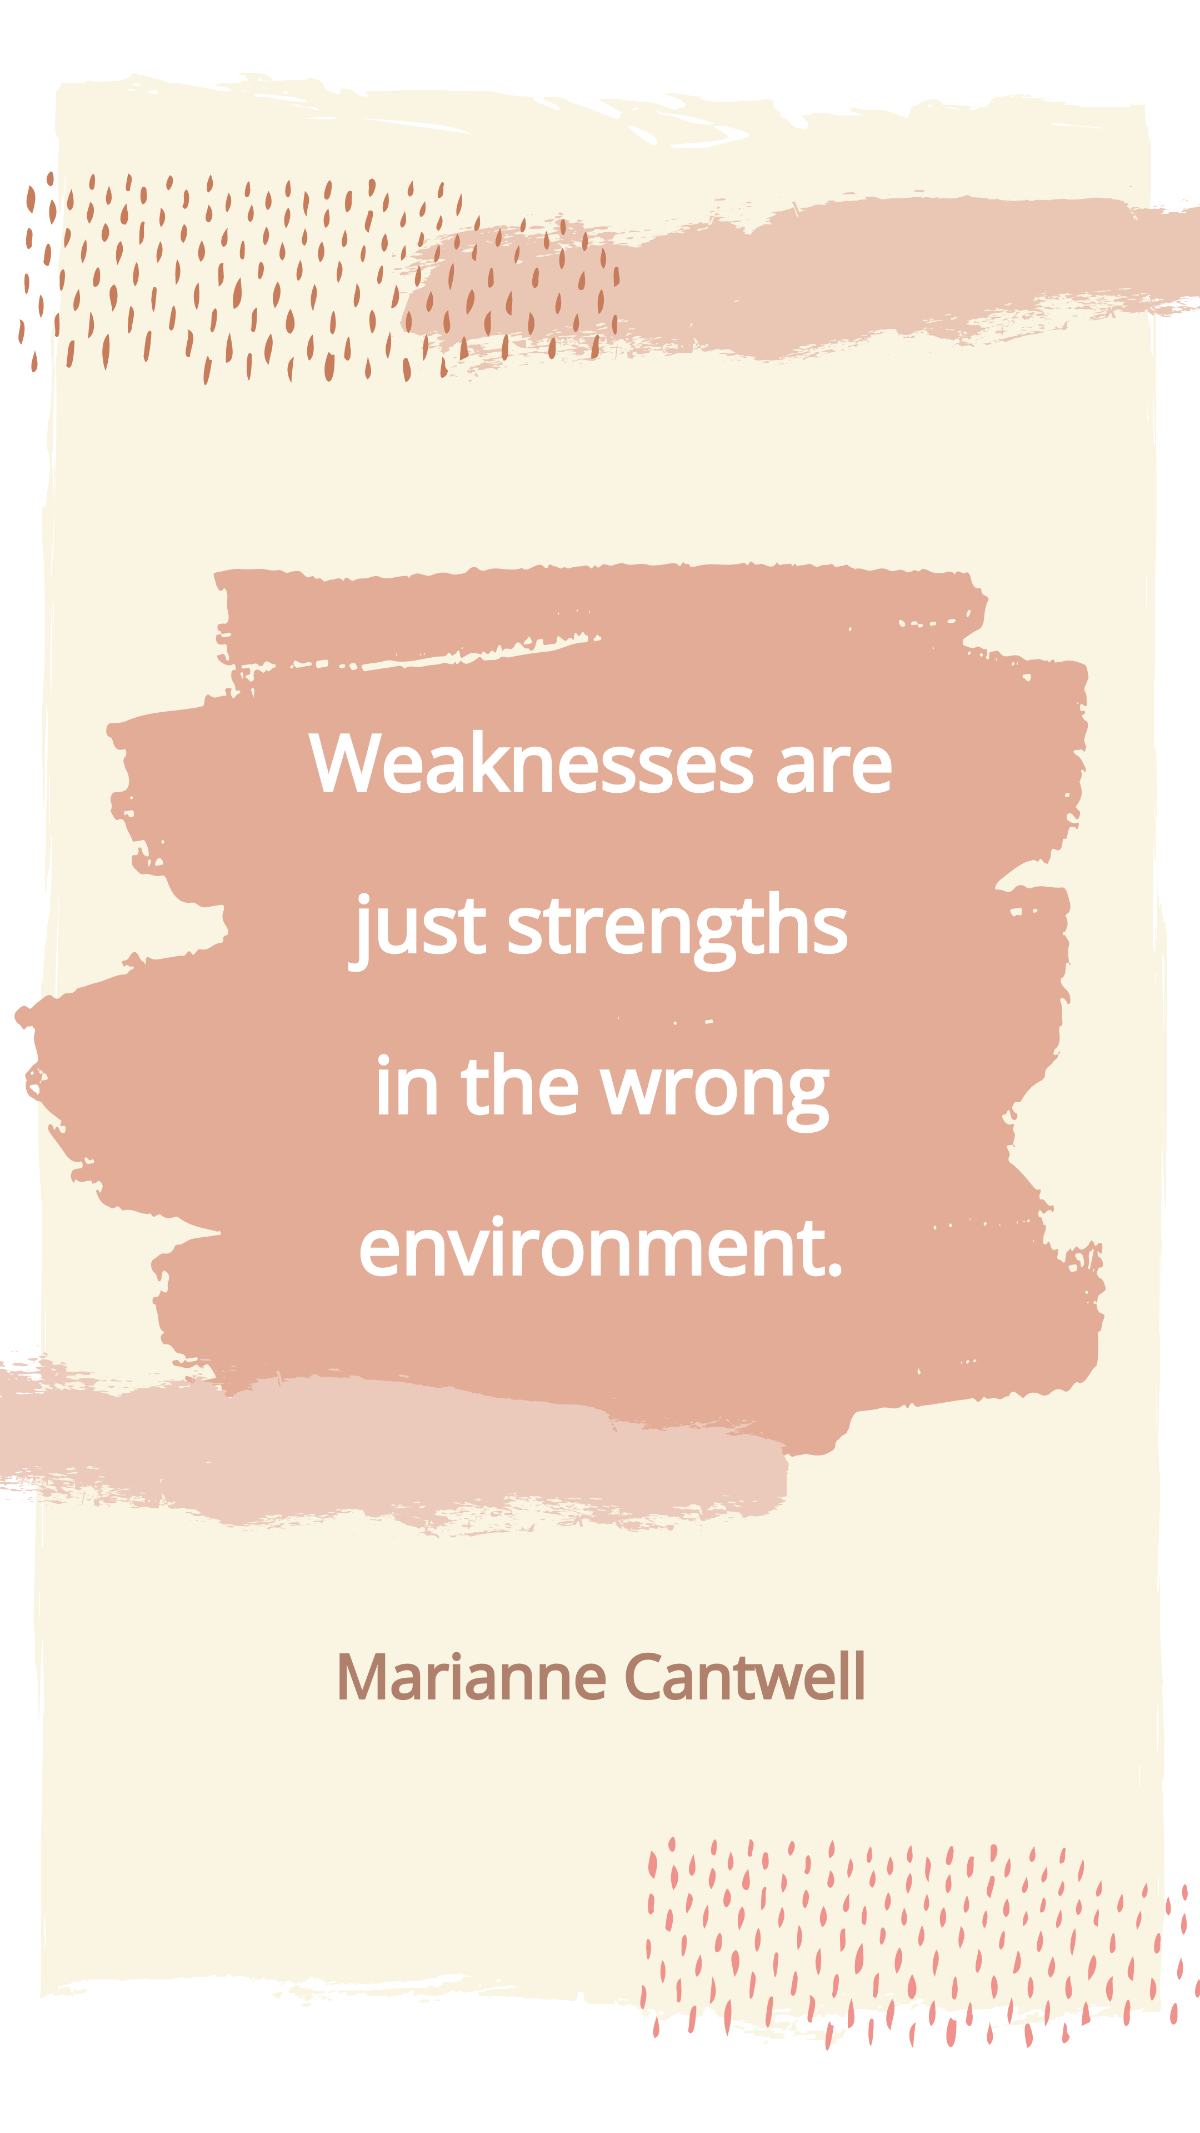 Marianne Cantwell - Weaknesses are just strengths in the wrong environment.